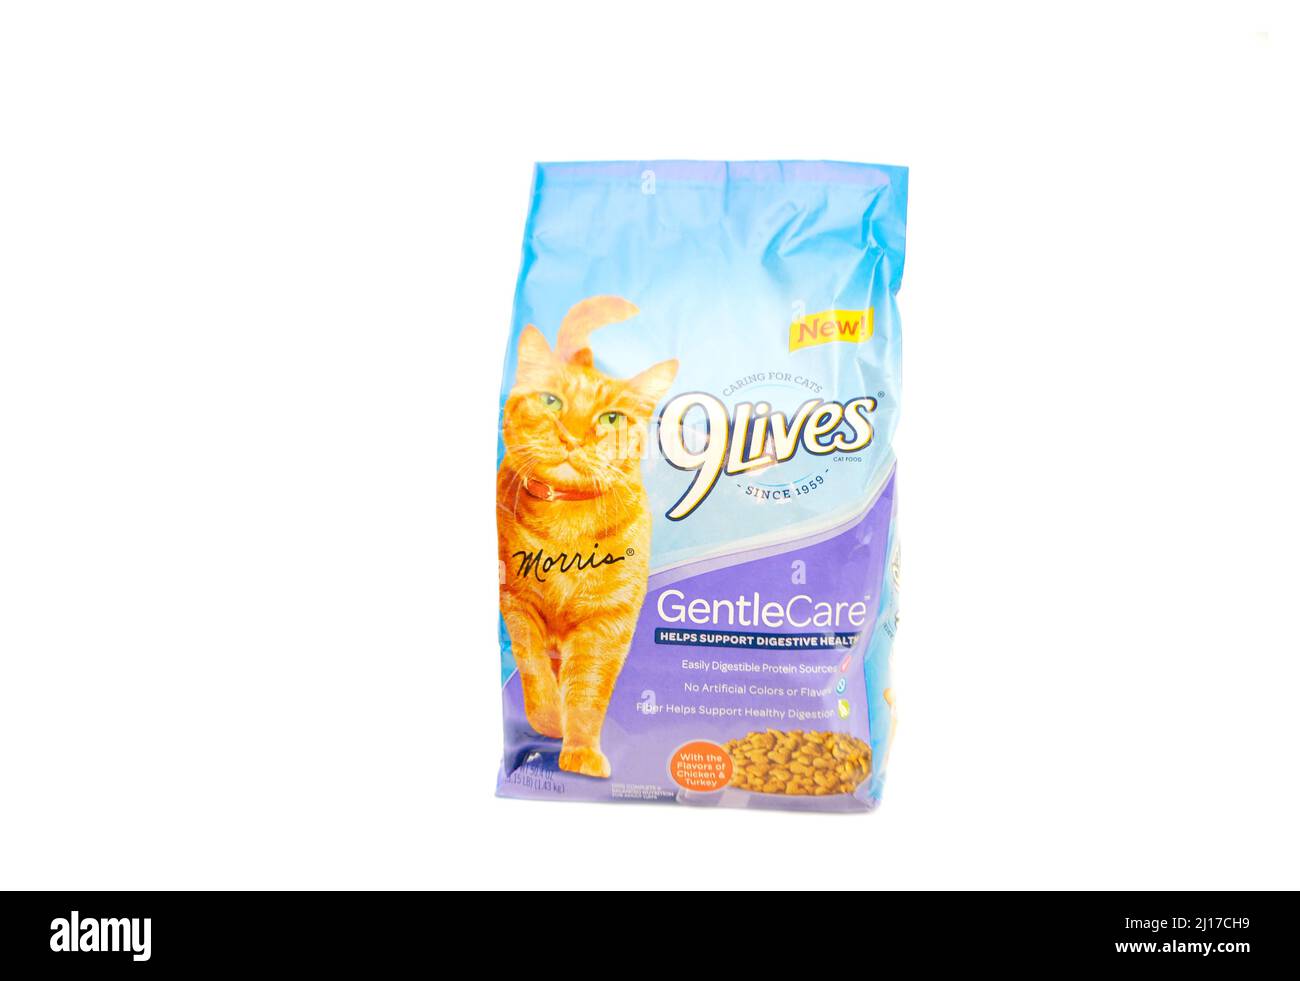 9 Lives Cat Food - Gentle Care for the digestive System Foto Stock